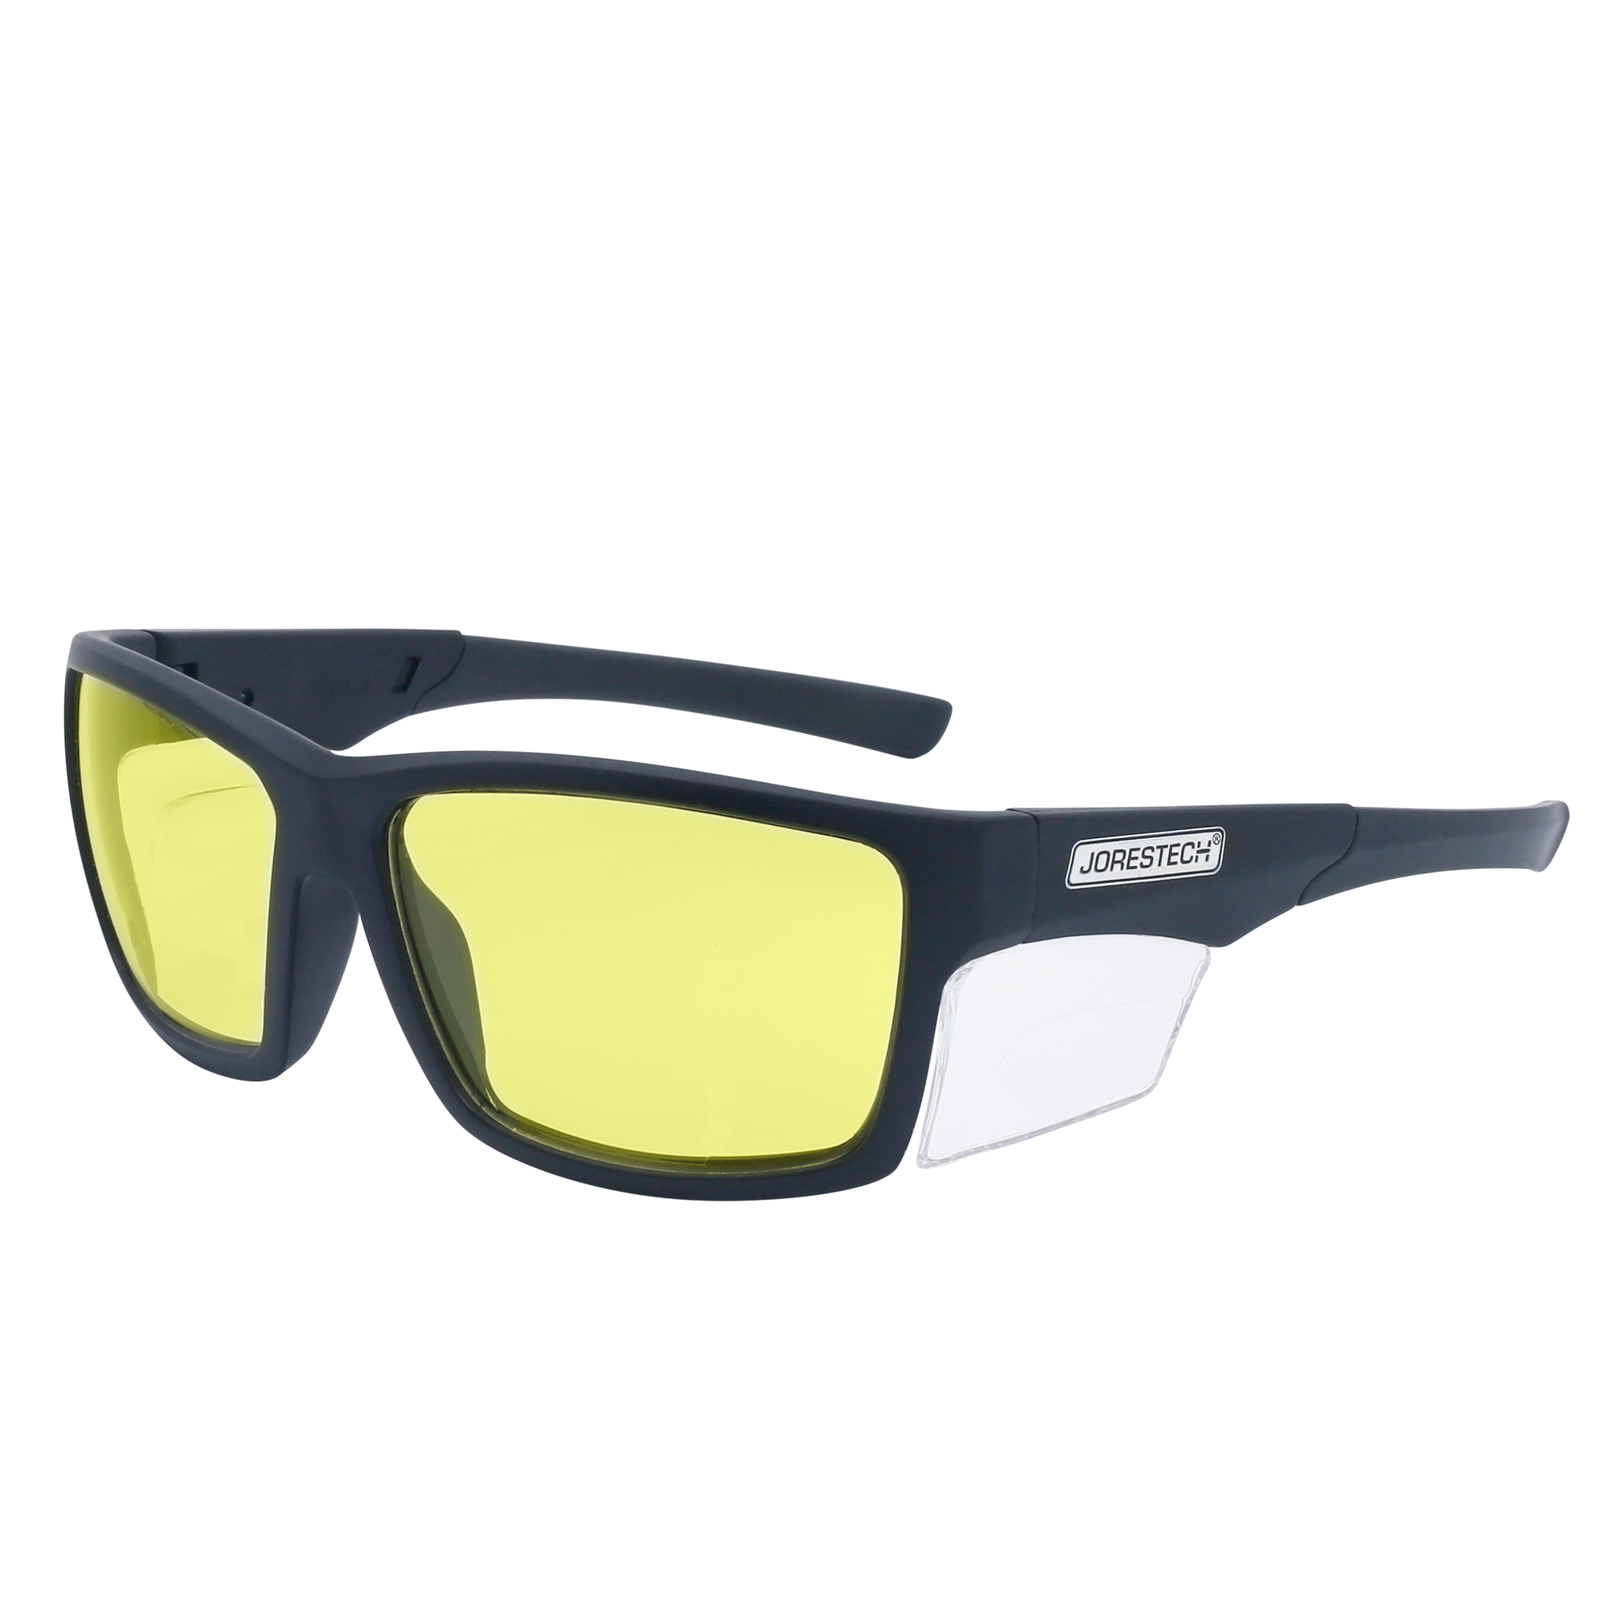 Image shows a diagonal view of a JORESTECH safety yellow eyeglasses  with transparent side shield for high impact protection. These safety glasses are ANSI compliant and have black frame and yellow polycarbonate lenses. The background of the image is white